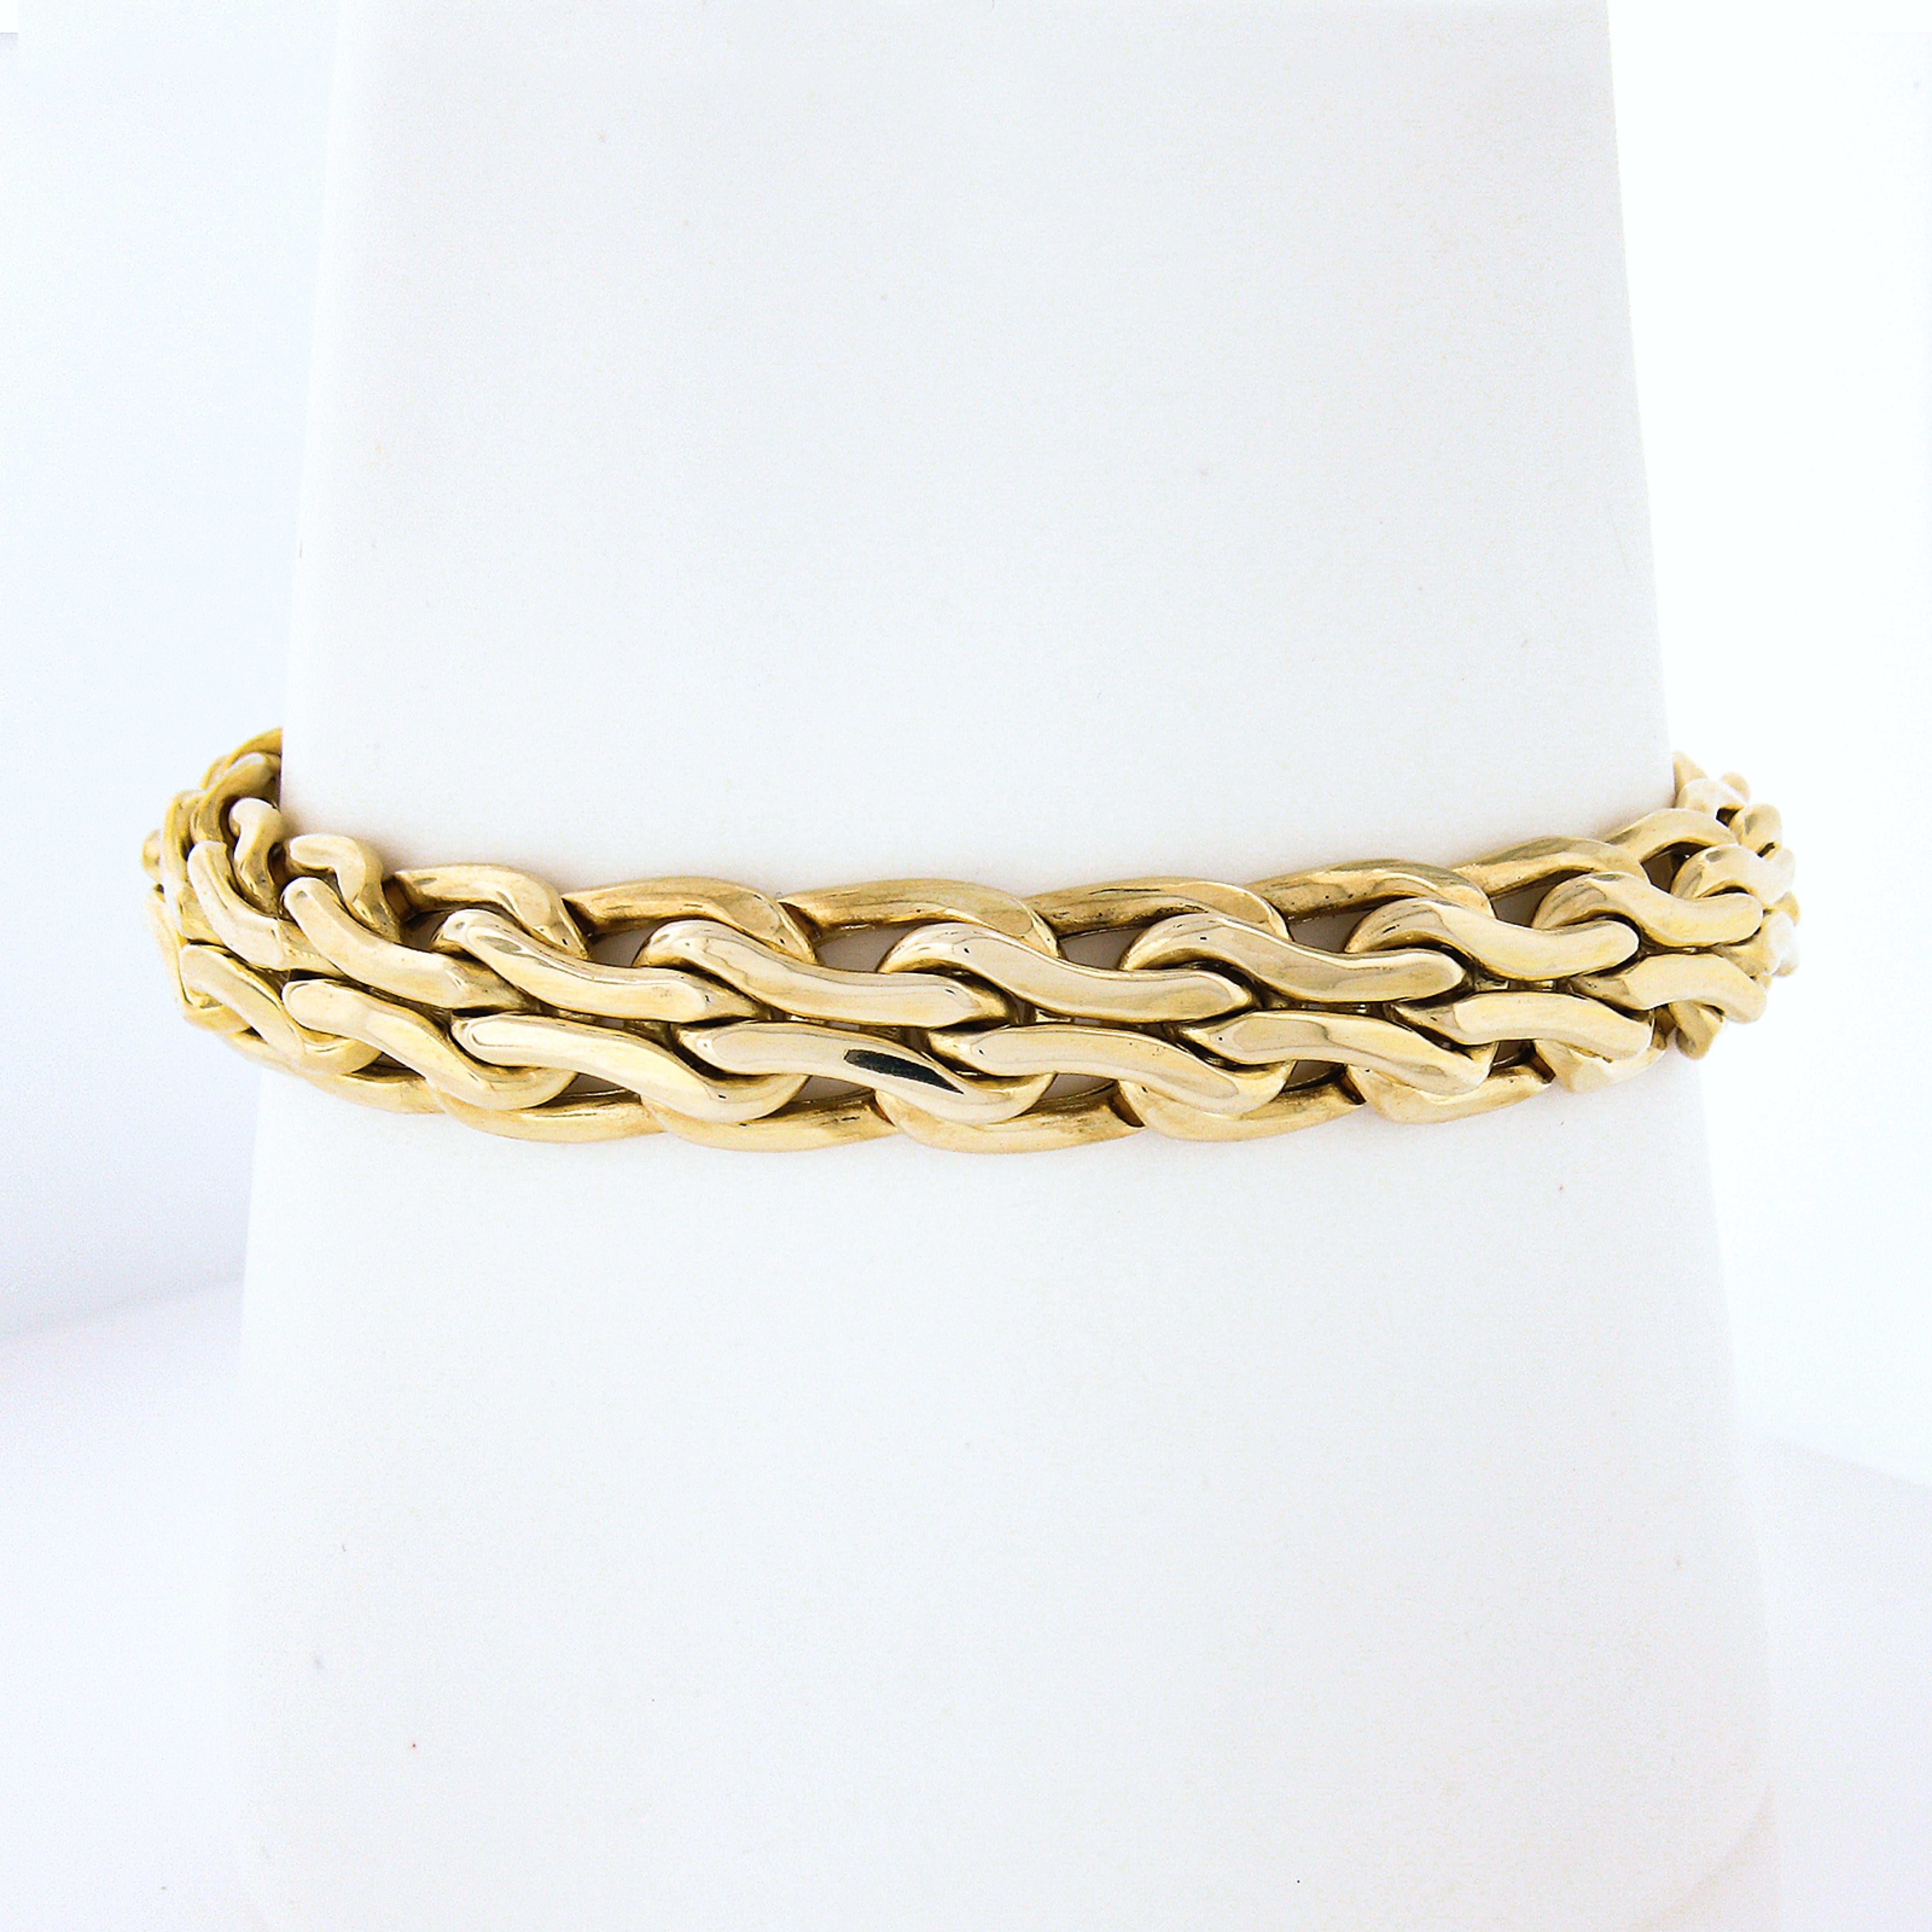 Here we have a very well made bracelet designed by H.Stern that is crafted from solid 14k yellow gold. The bracelet features wide puffed Bismark links with an amazing high polished finish throughout and connect seamlessly to give the piece its